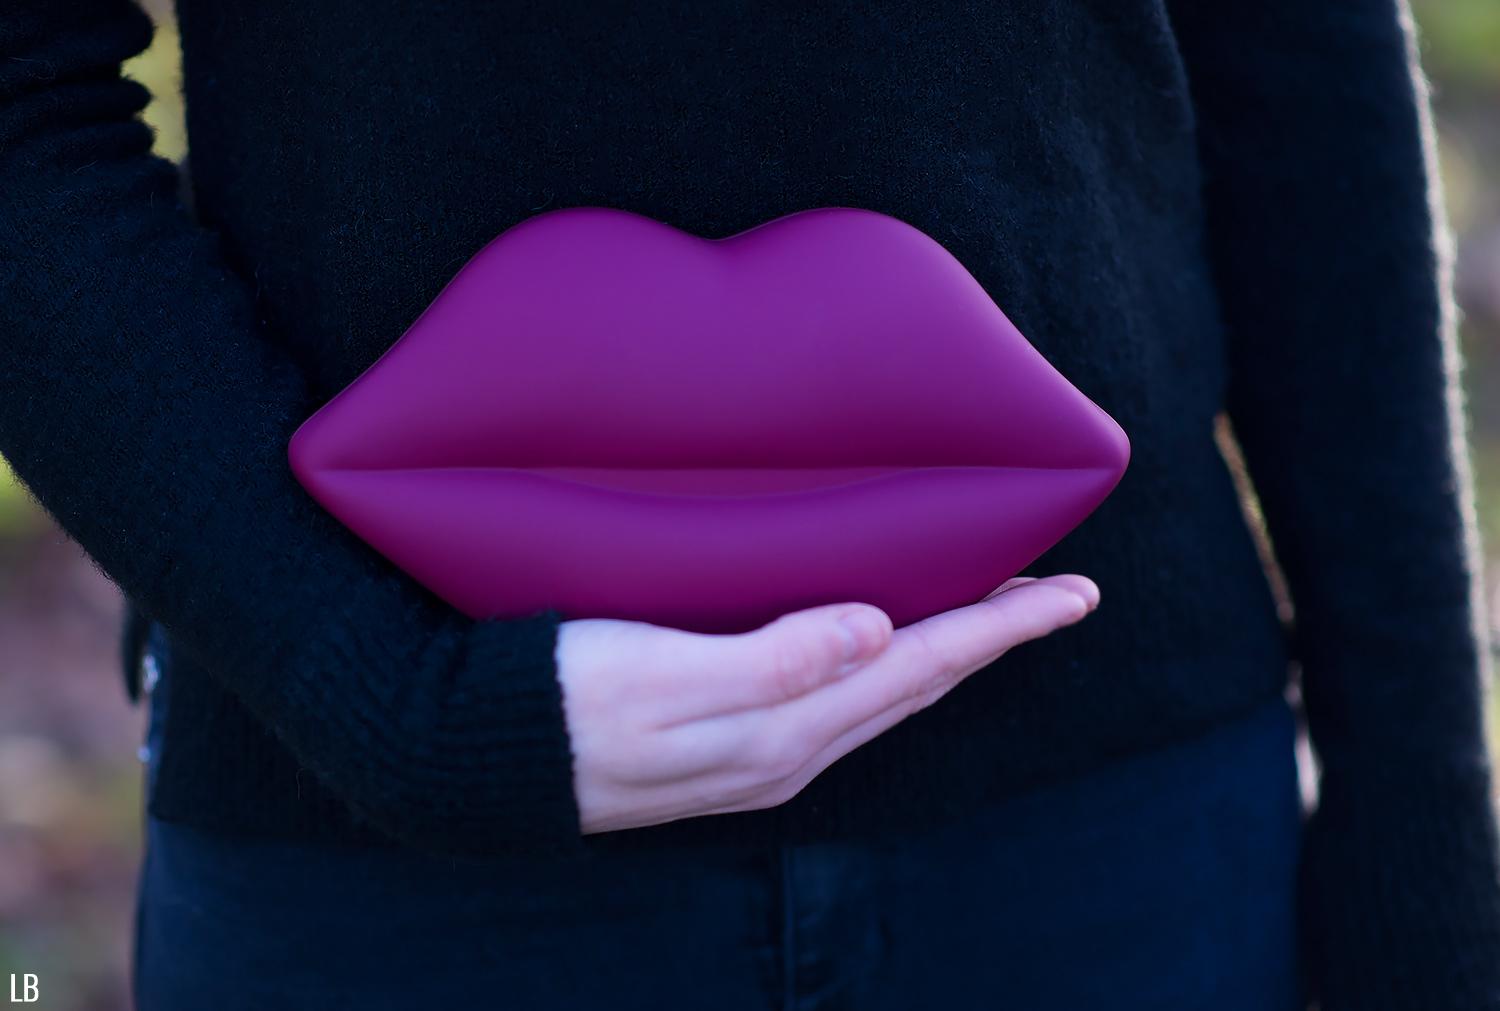 Lulu Guinness Cassis Powder Coated Lips Clutch Review 2